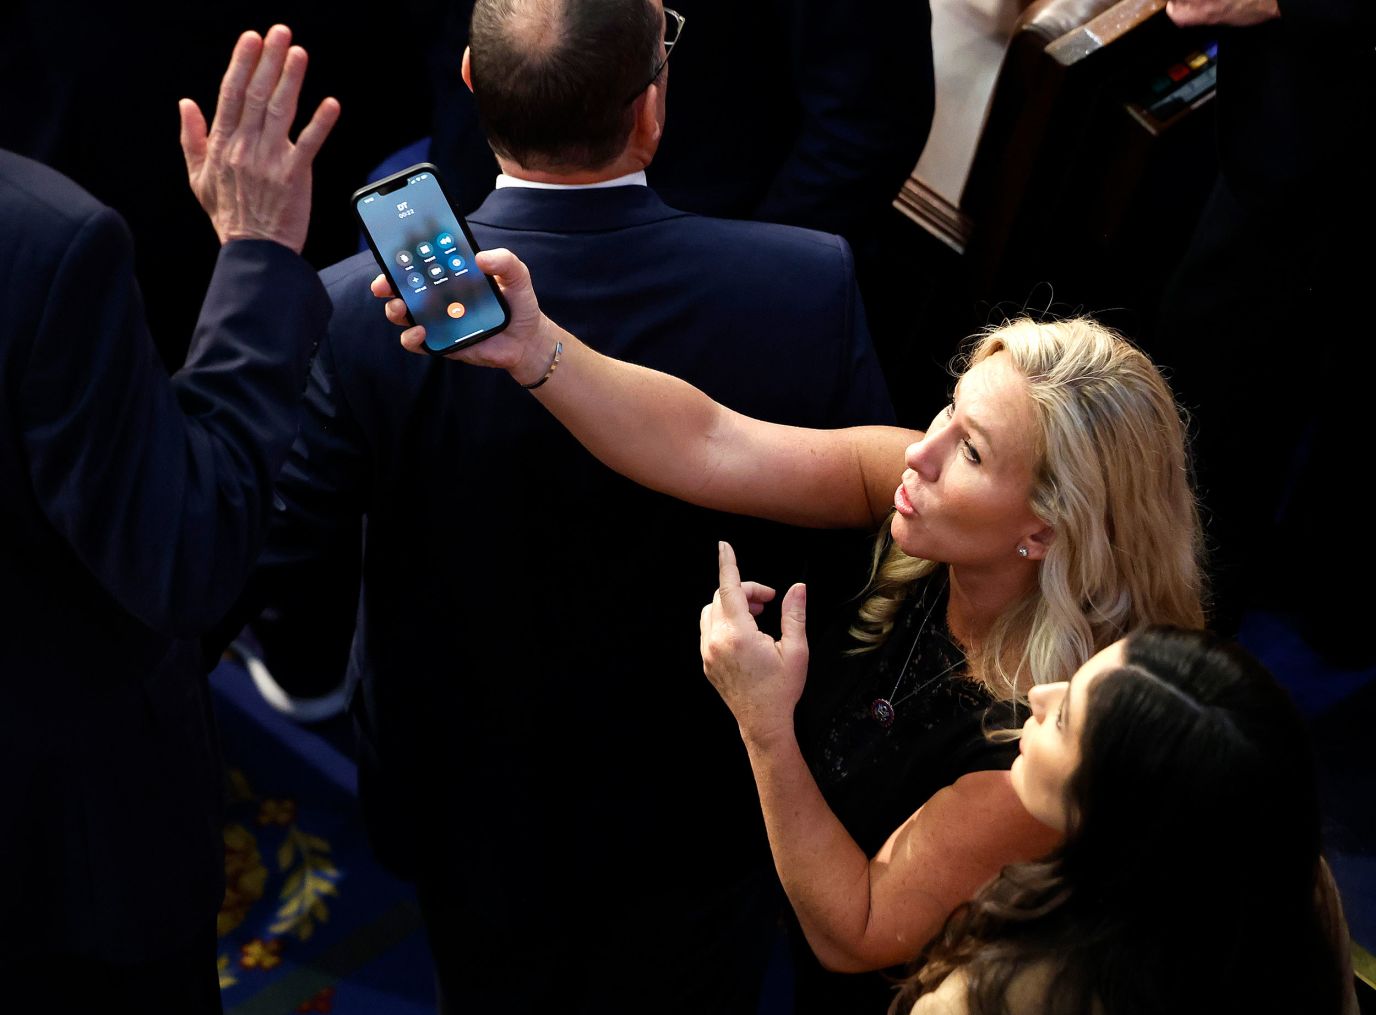 U.S. Representative Marjorie Taylor-Greene, a Republican from Georgia, holds a phone with the initials "DT" on screen Friday night.  His spokesperson confirmed it was former President Donald Trump on the phone.